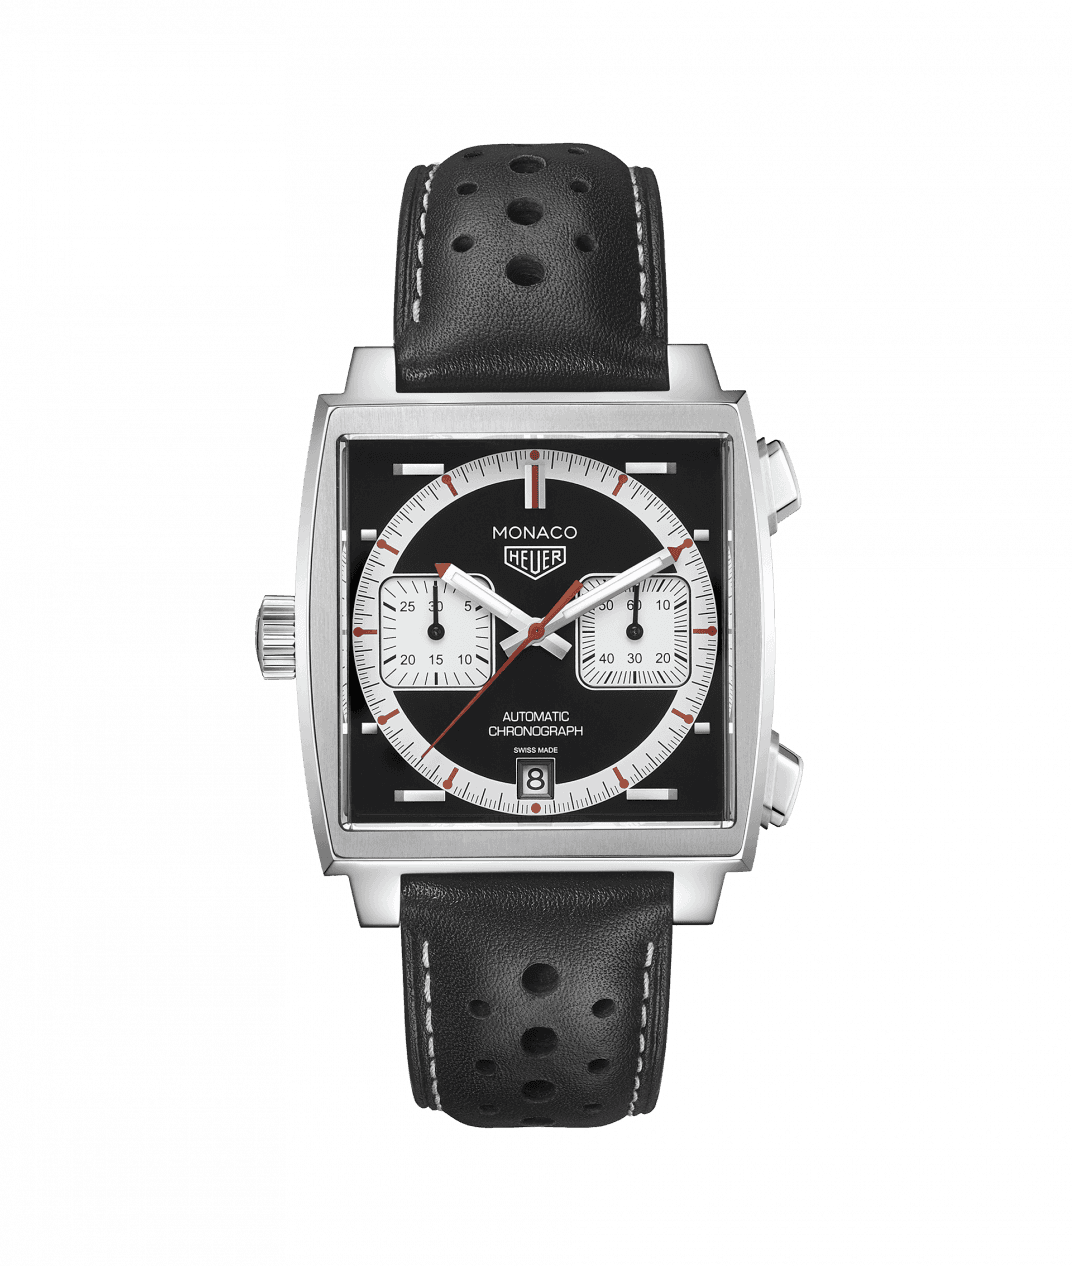 INTRODUCING: The TAG Heuer Monaco 1999-2009 Limited Edition